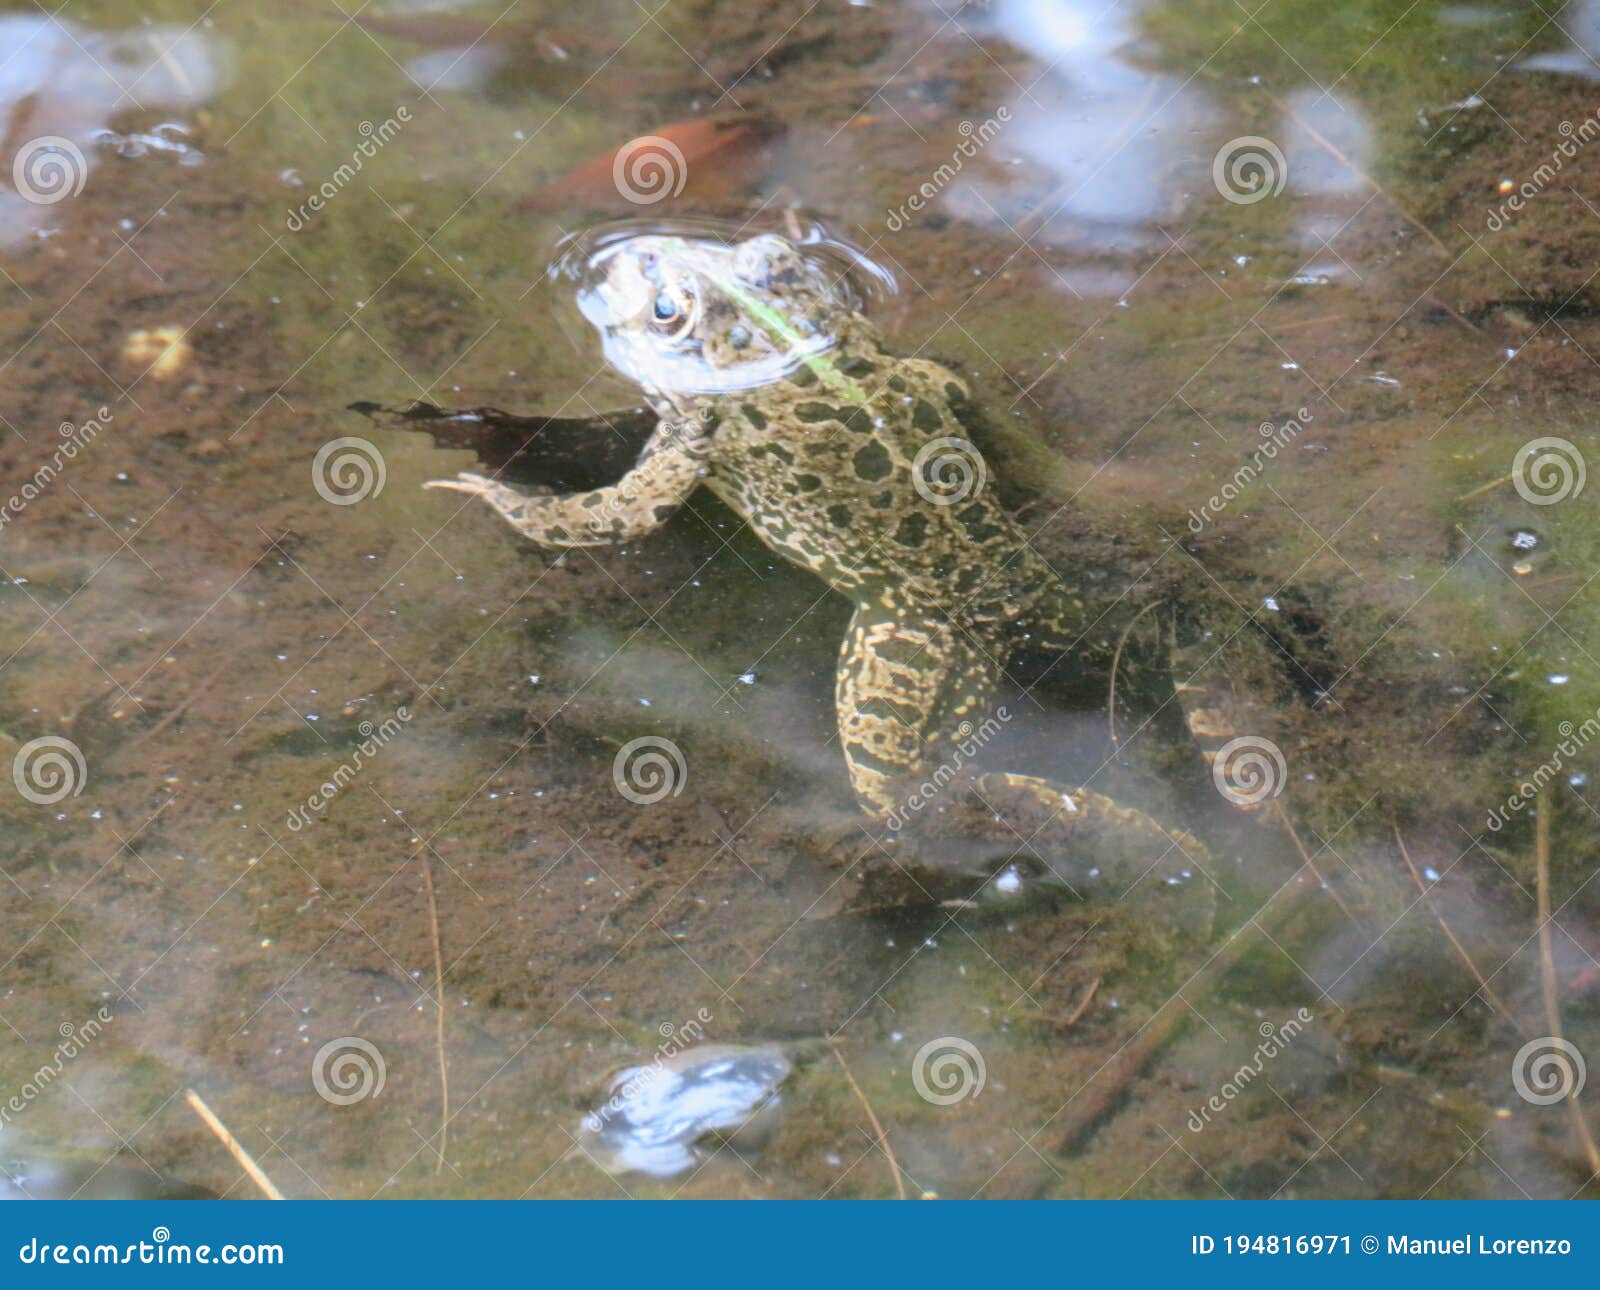 beautiful intense green frog in the water swimming waiting for the dam